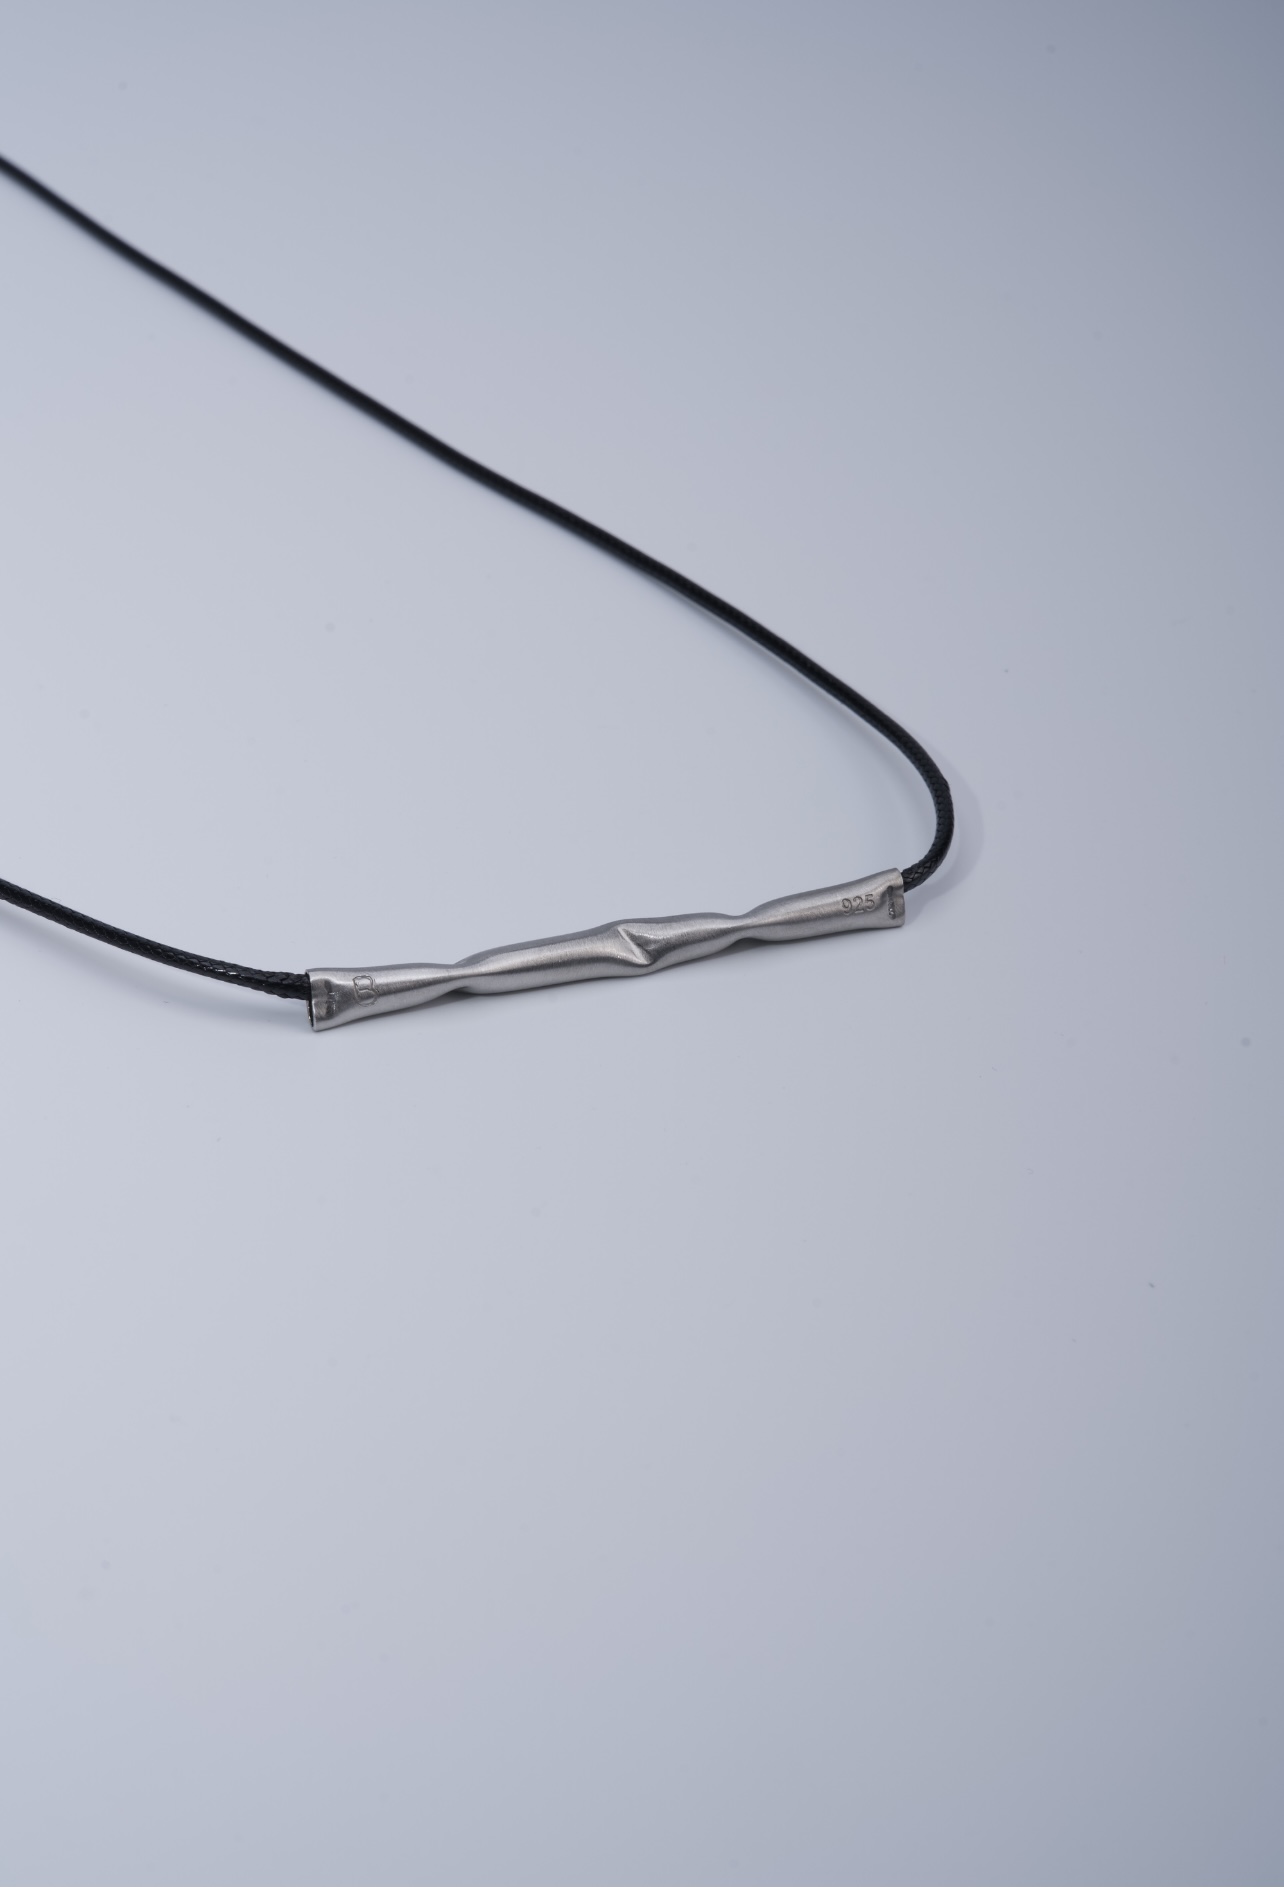 24K white gold vermeil necklace in 925 silver with black silk cord